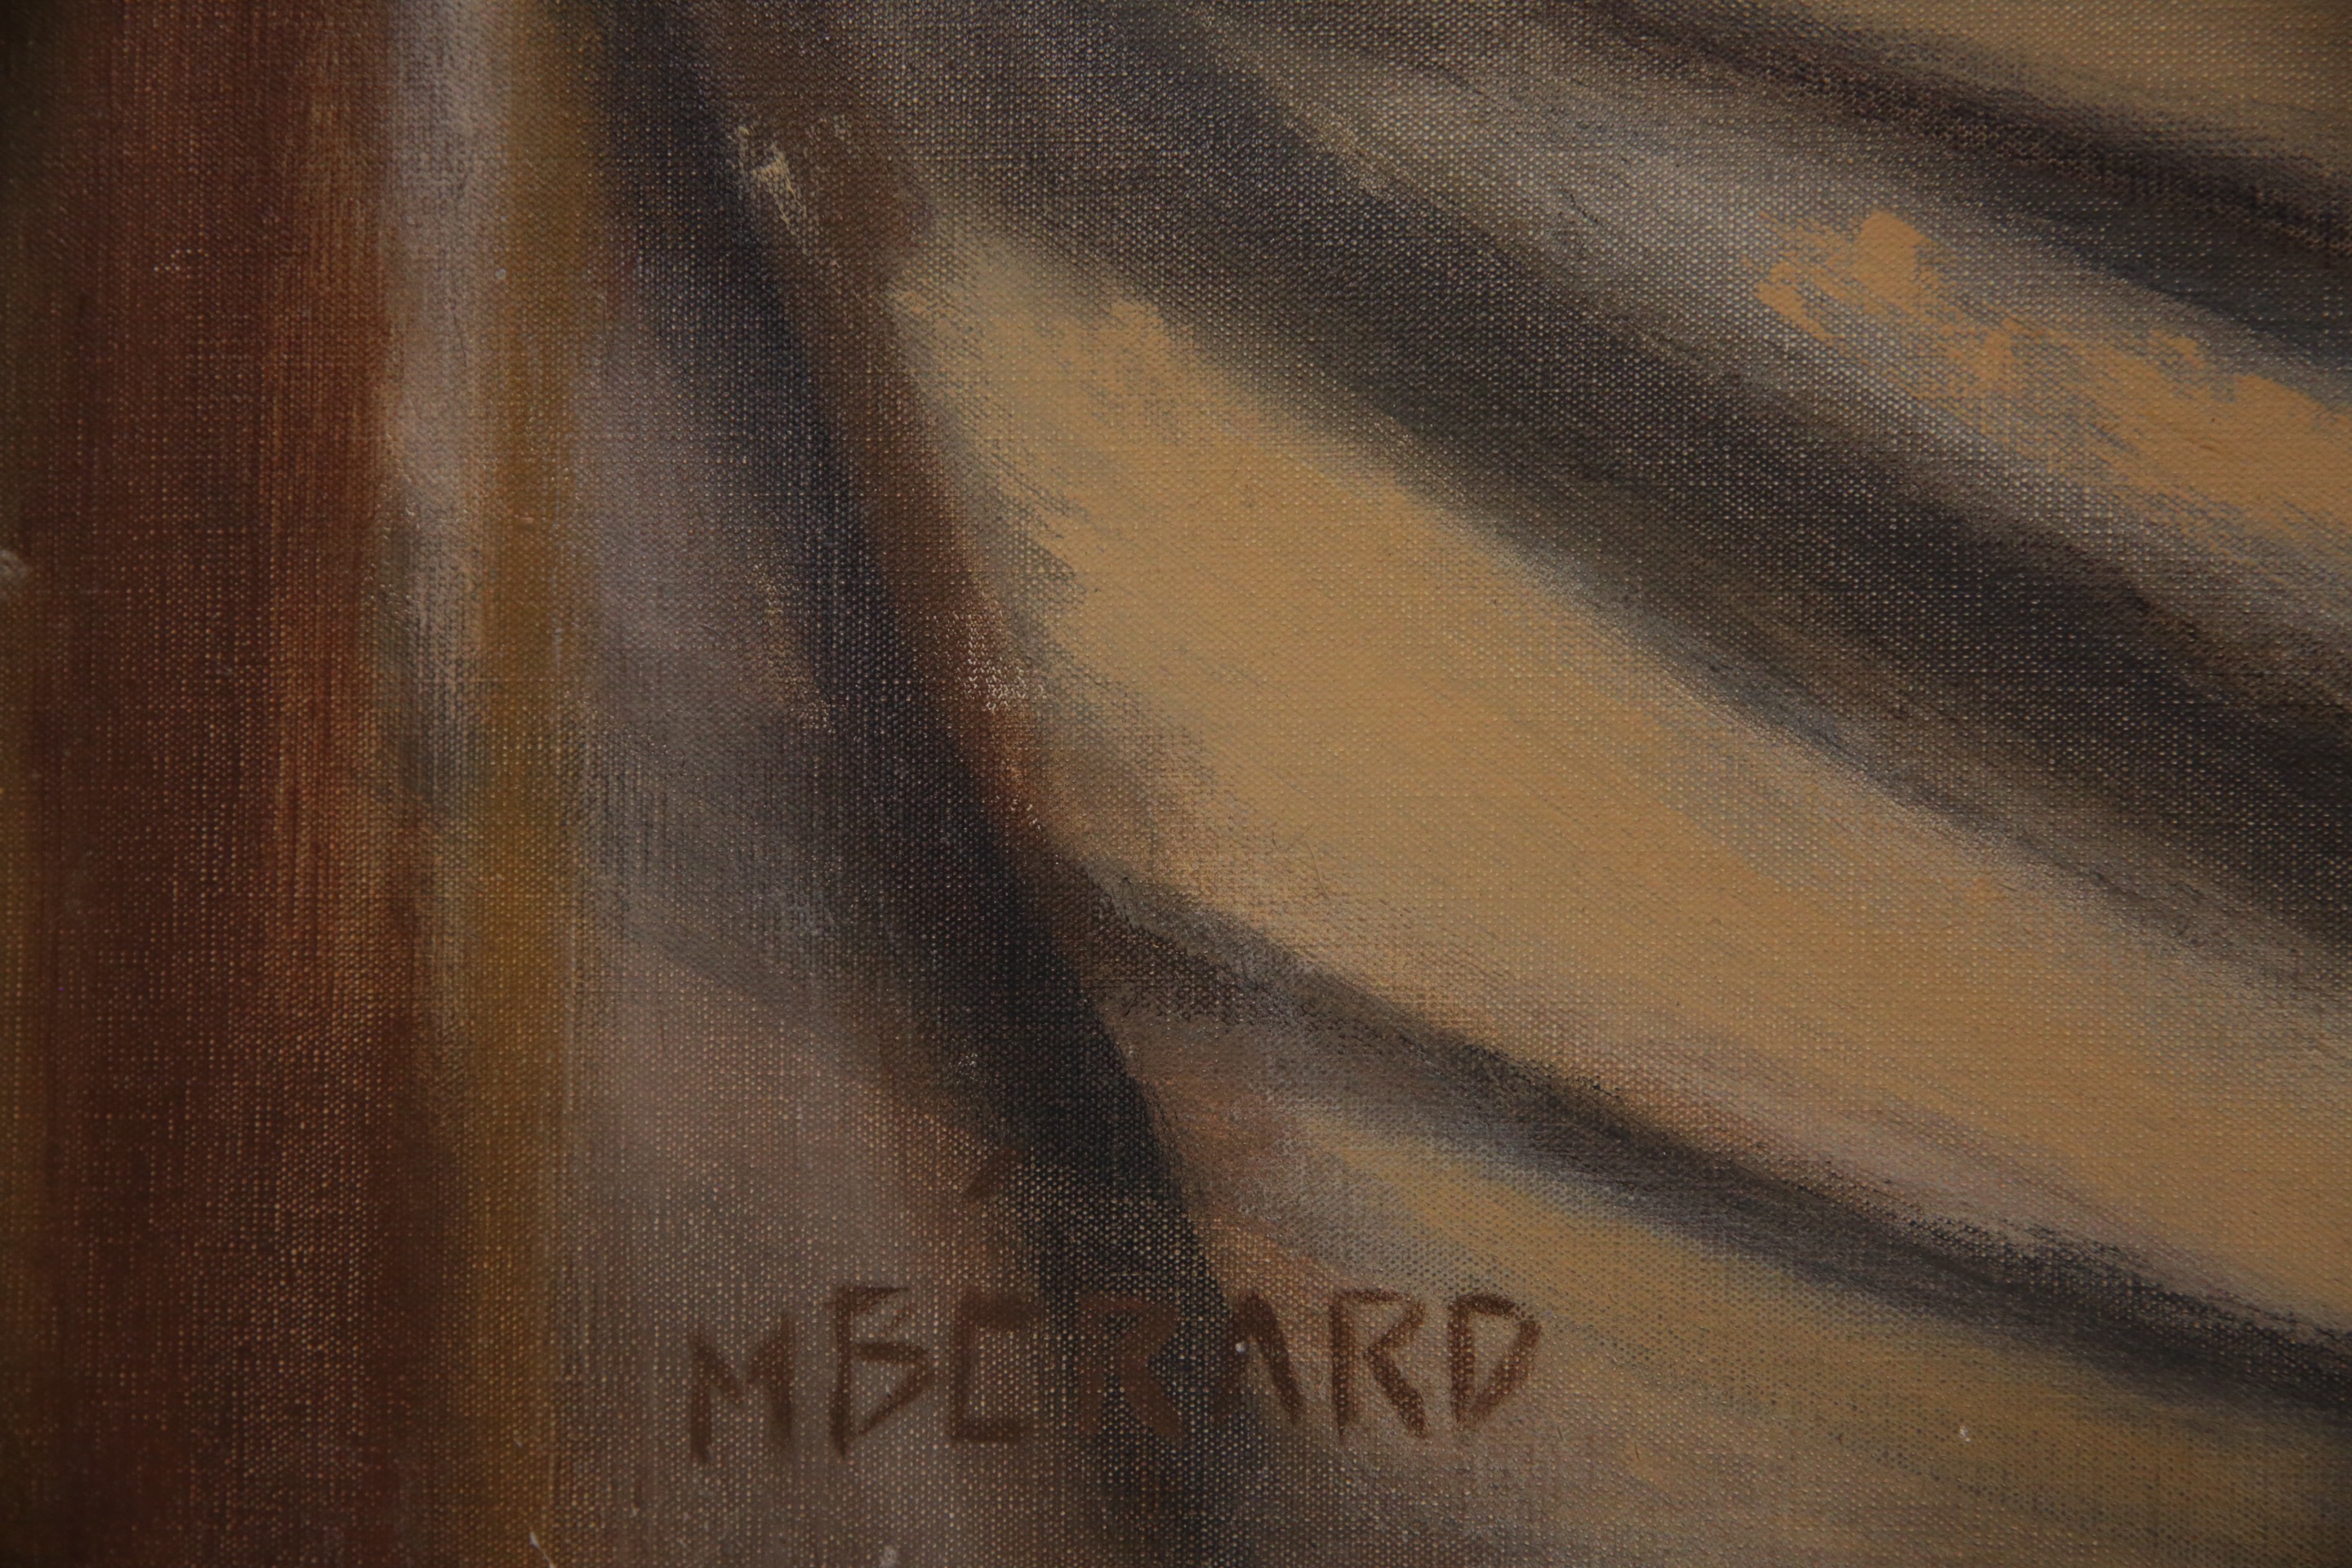 "The root", abstract composition, Oil on canvas Berard M, French painting 20th century. - Image 5 of 5